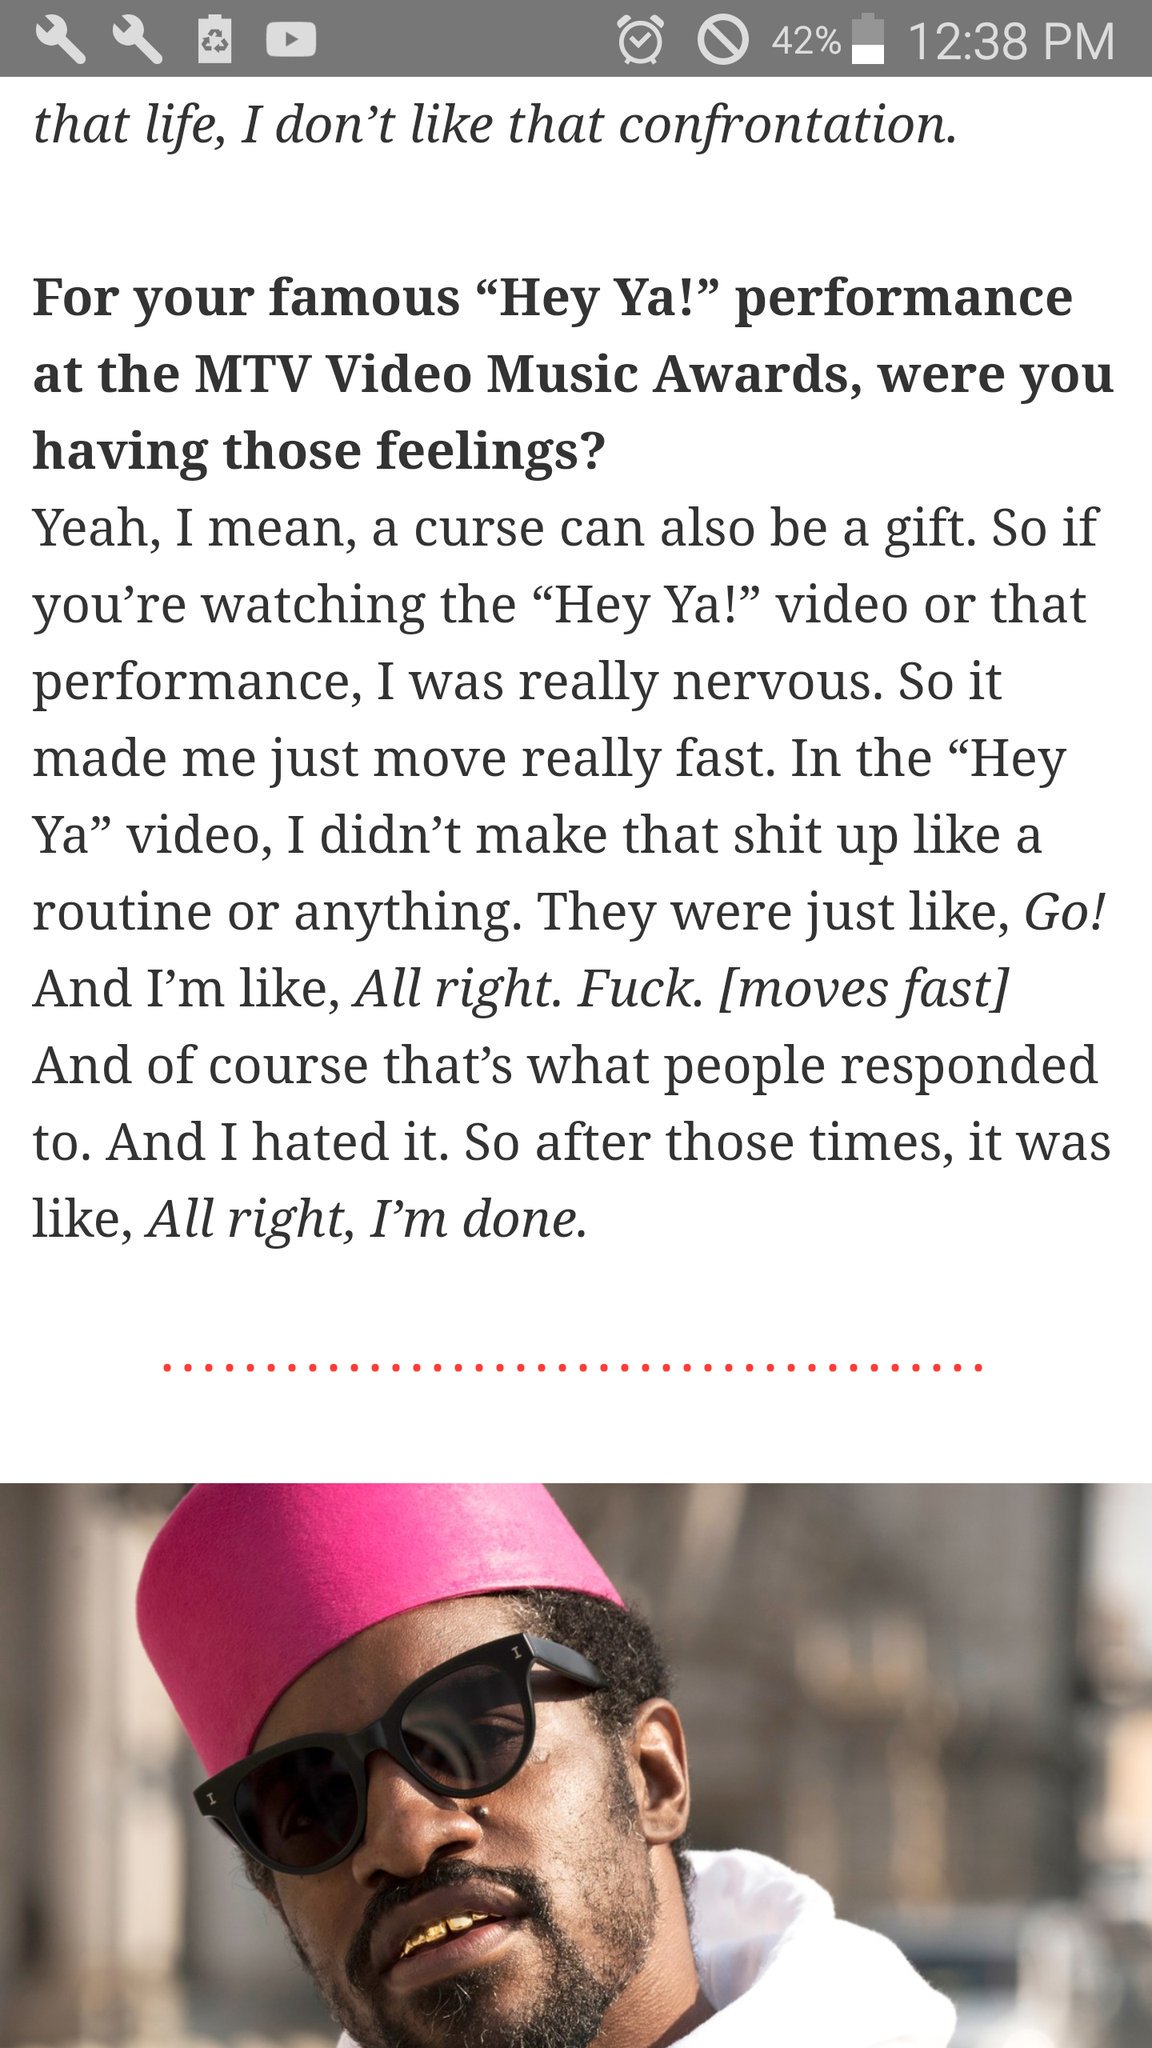 Happy birthday to André Benjamin 3000. This excerpt from an interview he did last year makes me laugh 